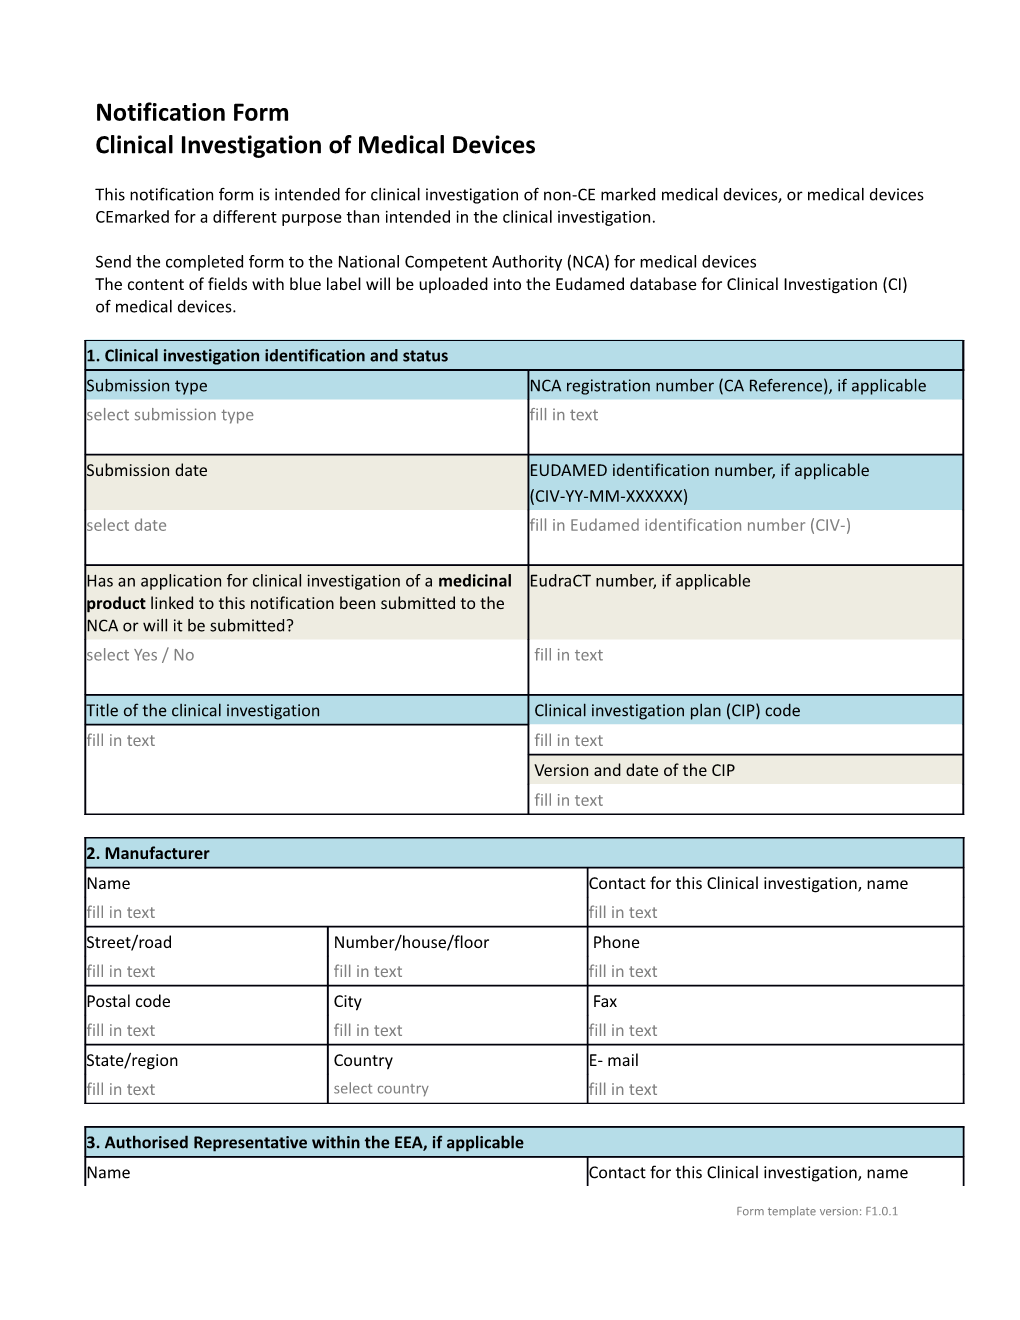 Notification Form Clinical Investigation of Medical Devices